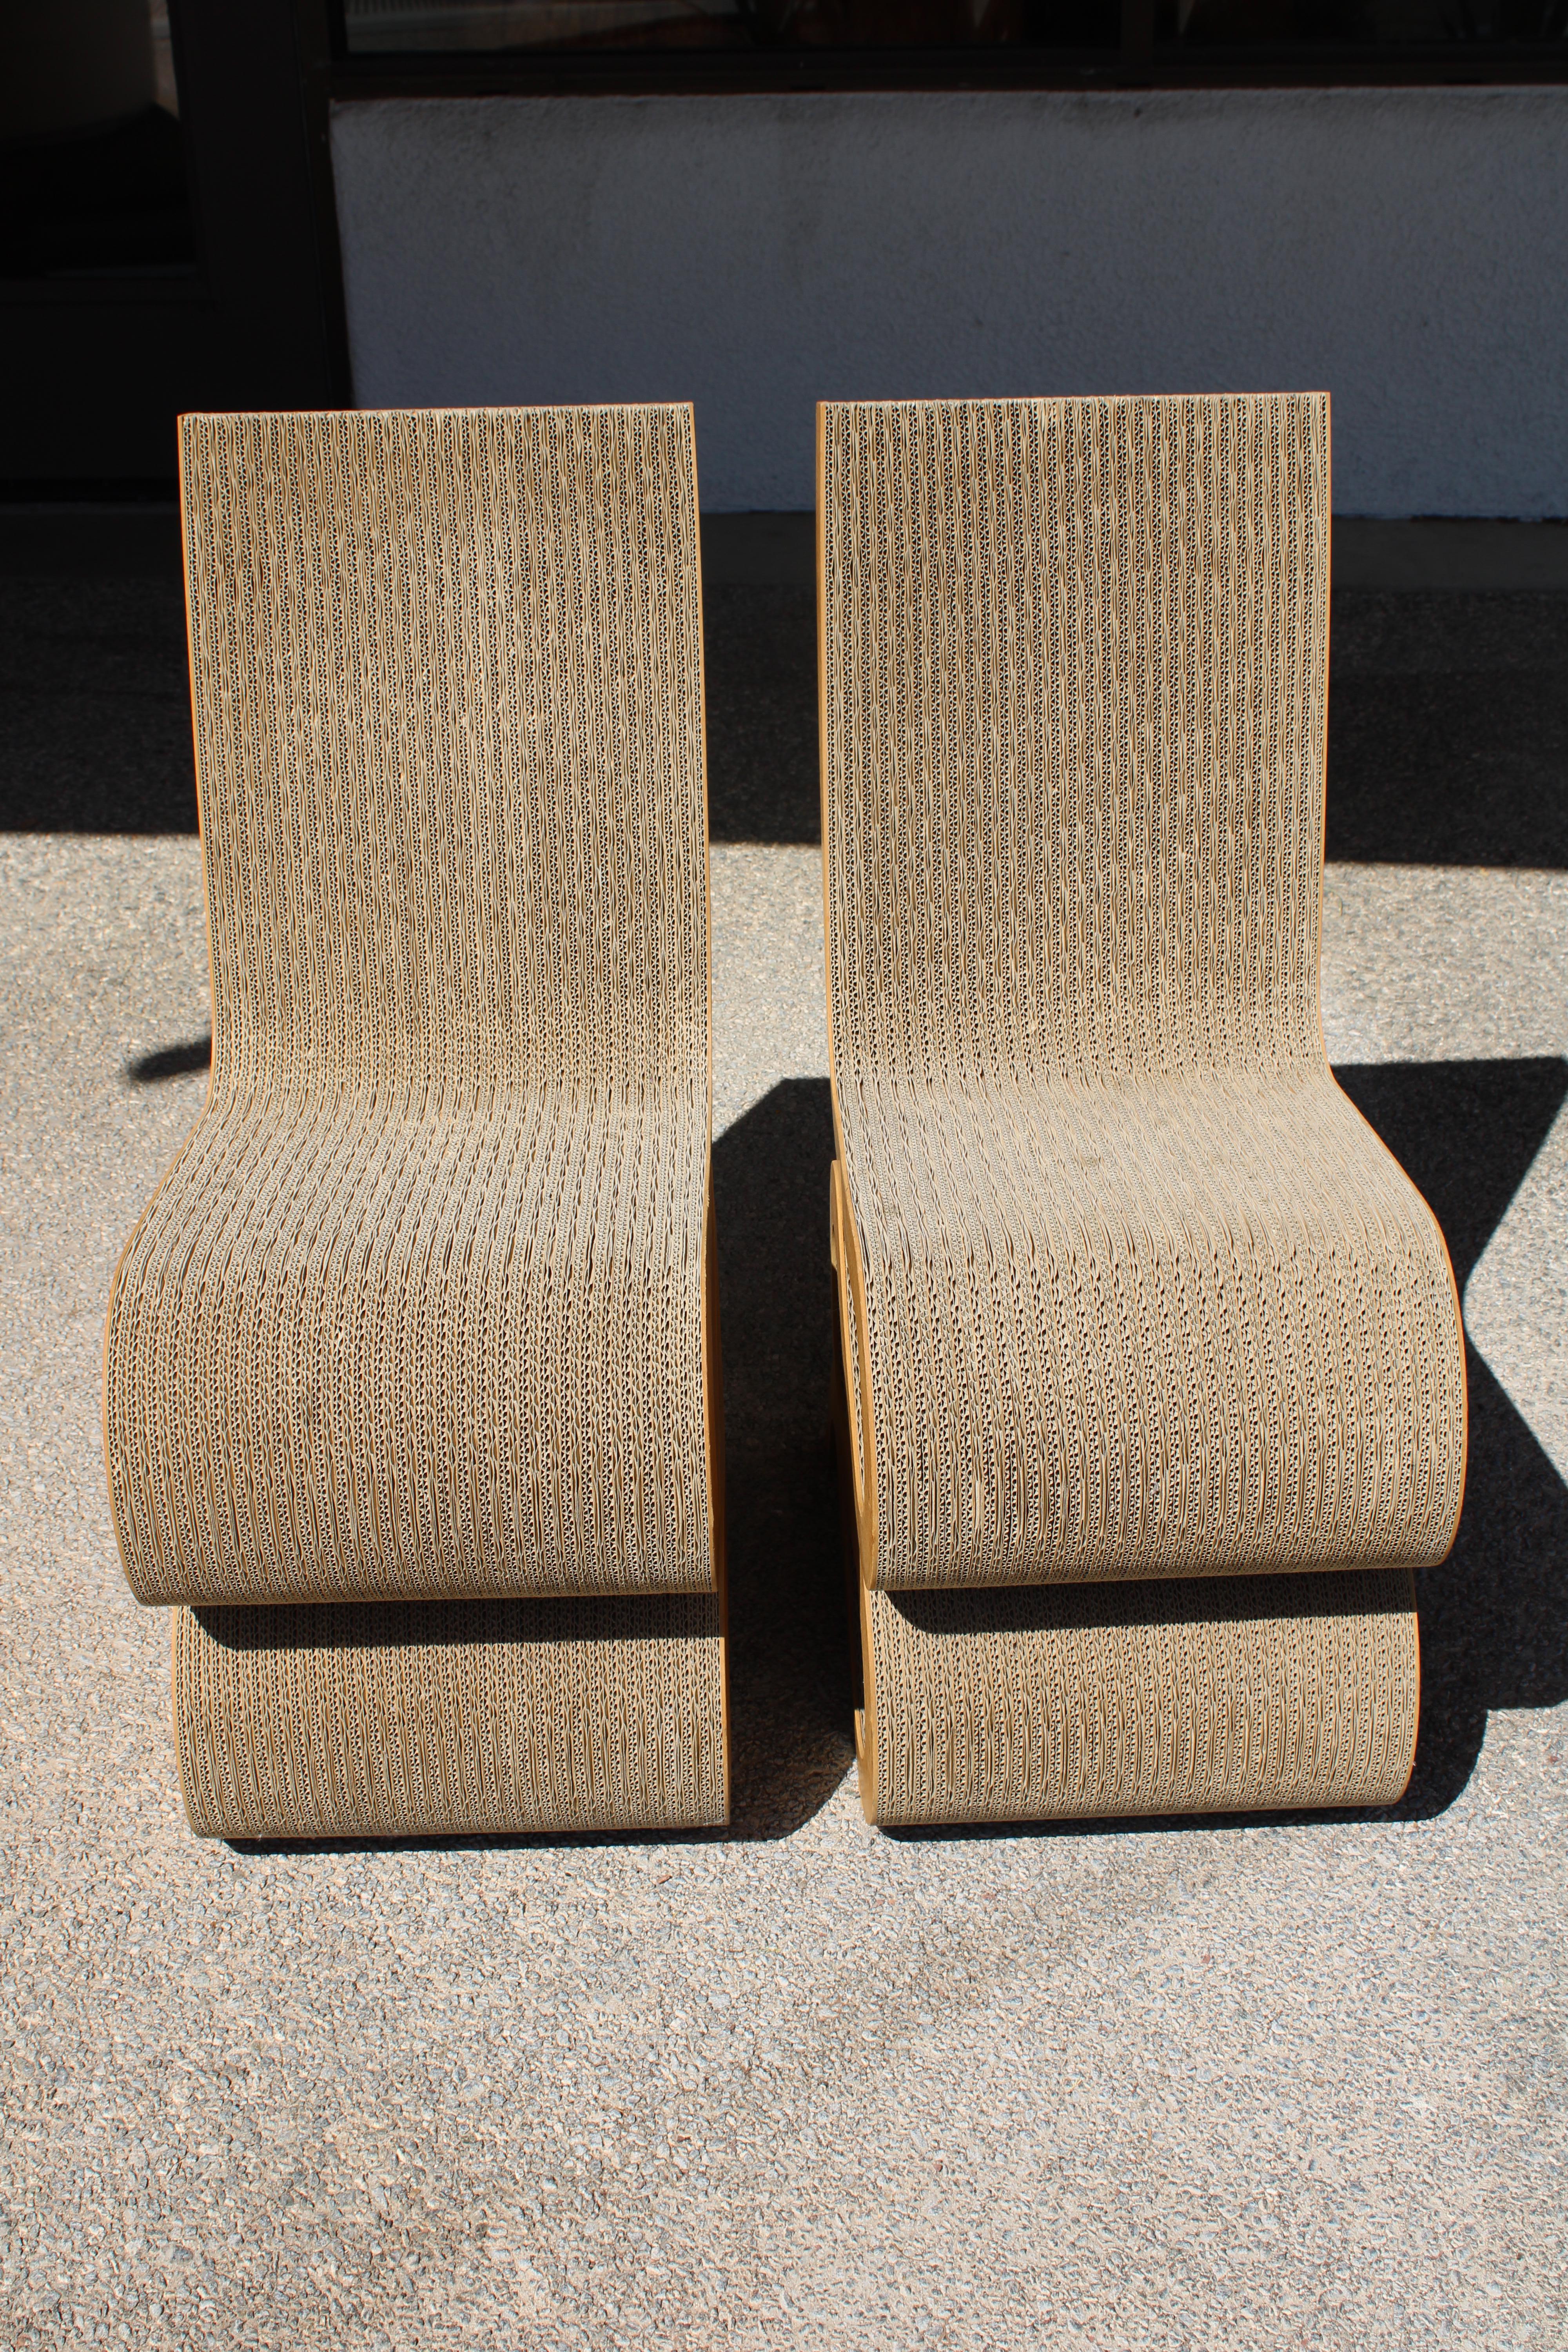 Corrugated cardboard wiggle side chair designed by Frank O. Gehry and reissued by Vitra. Each chair measures 14